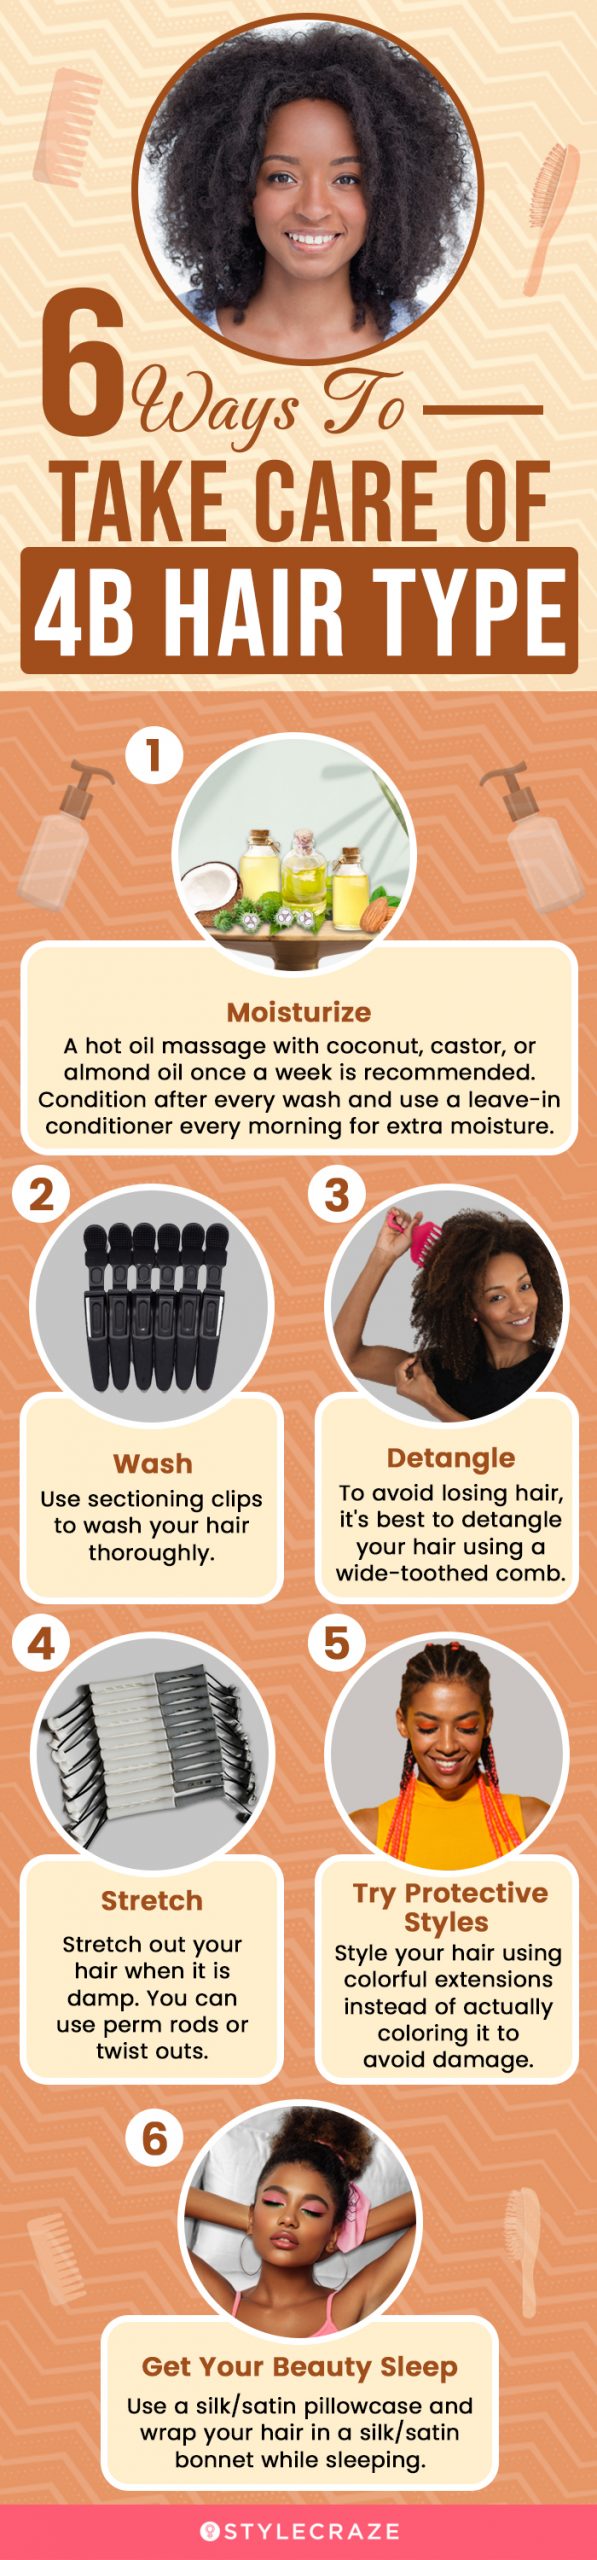 six ways to take care of 4b hair type [infographic]